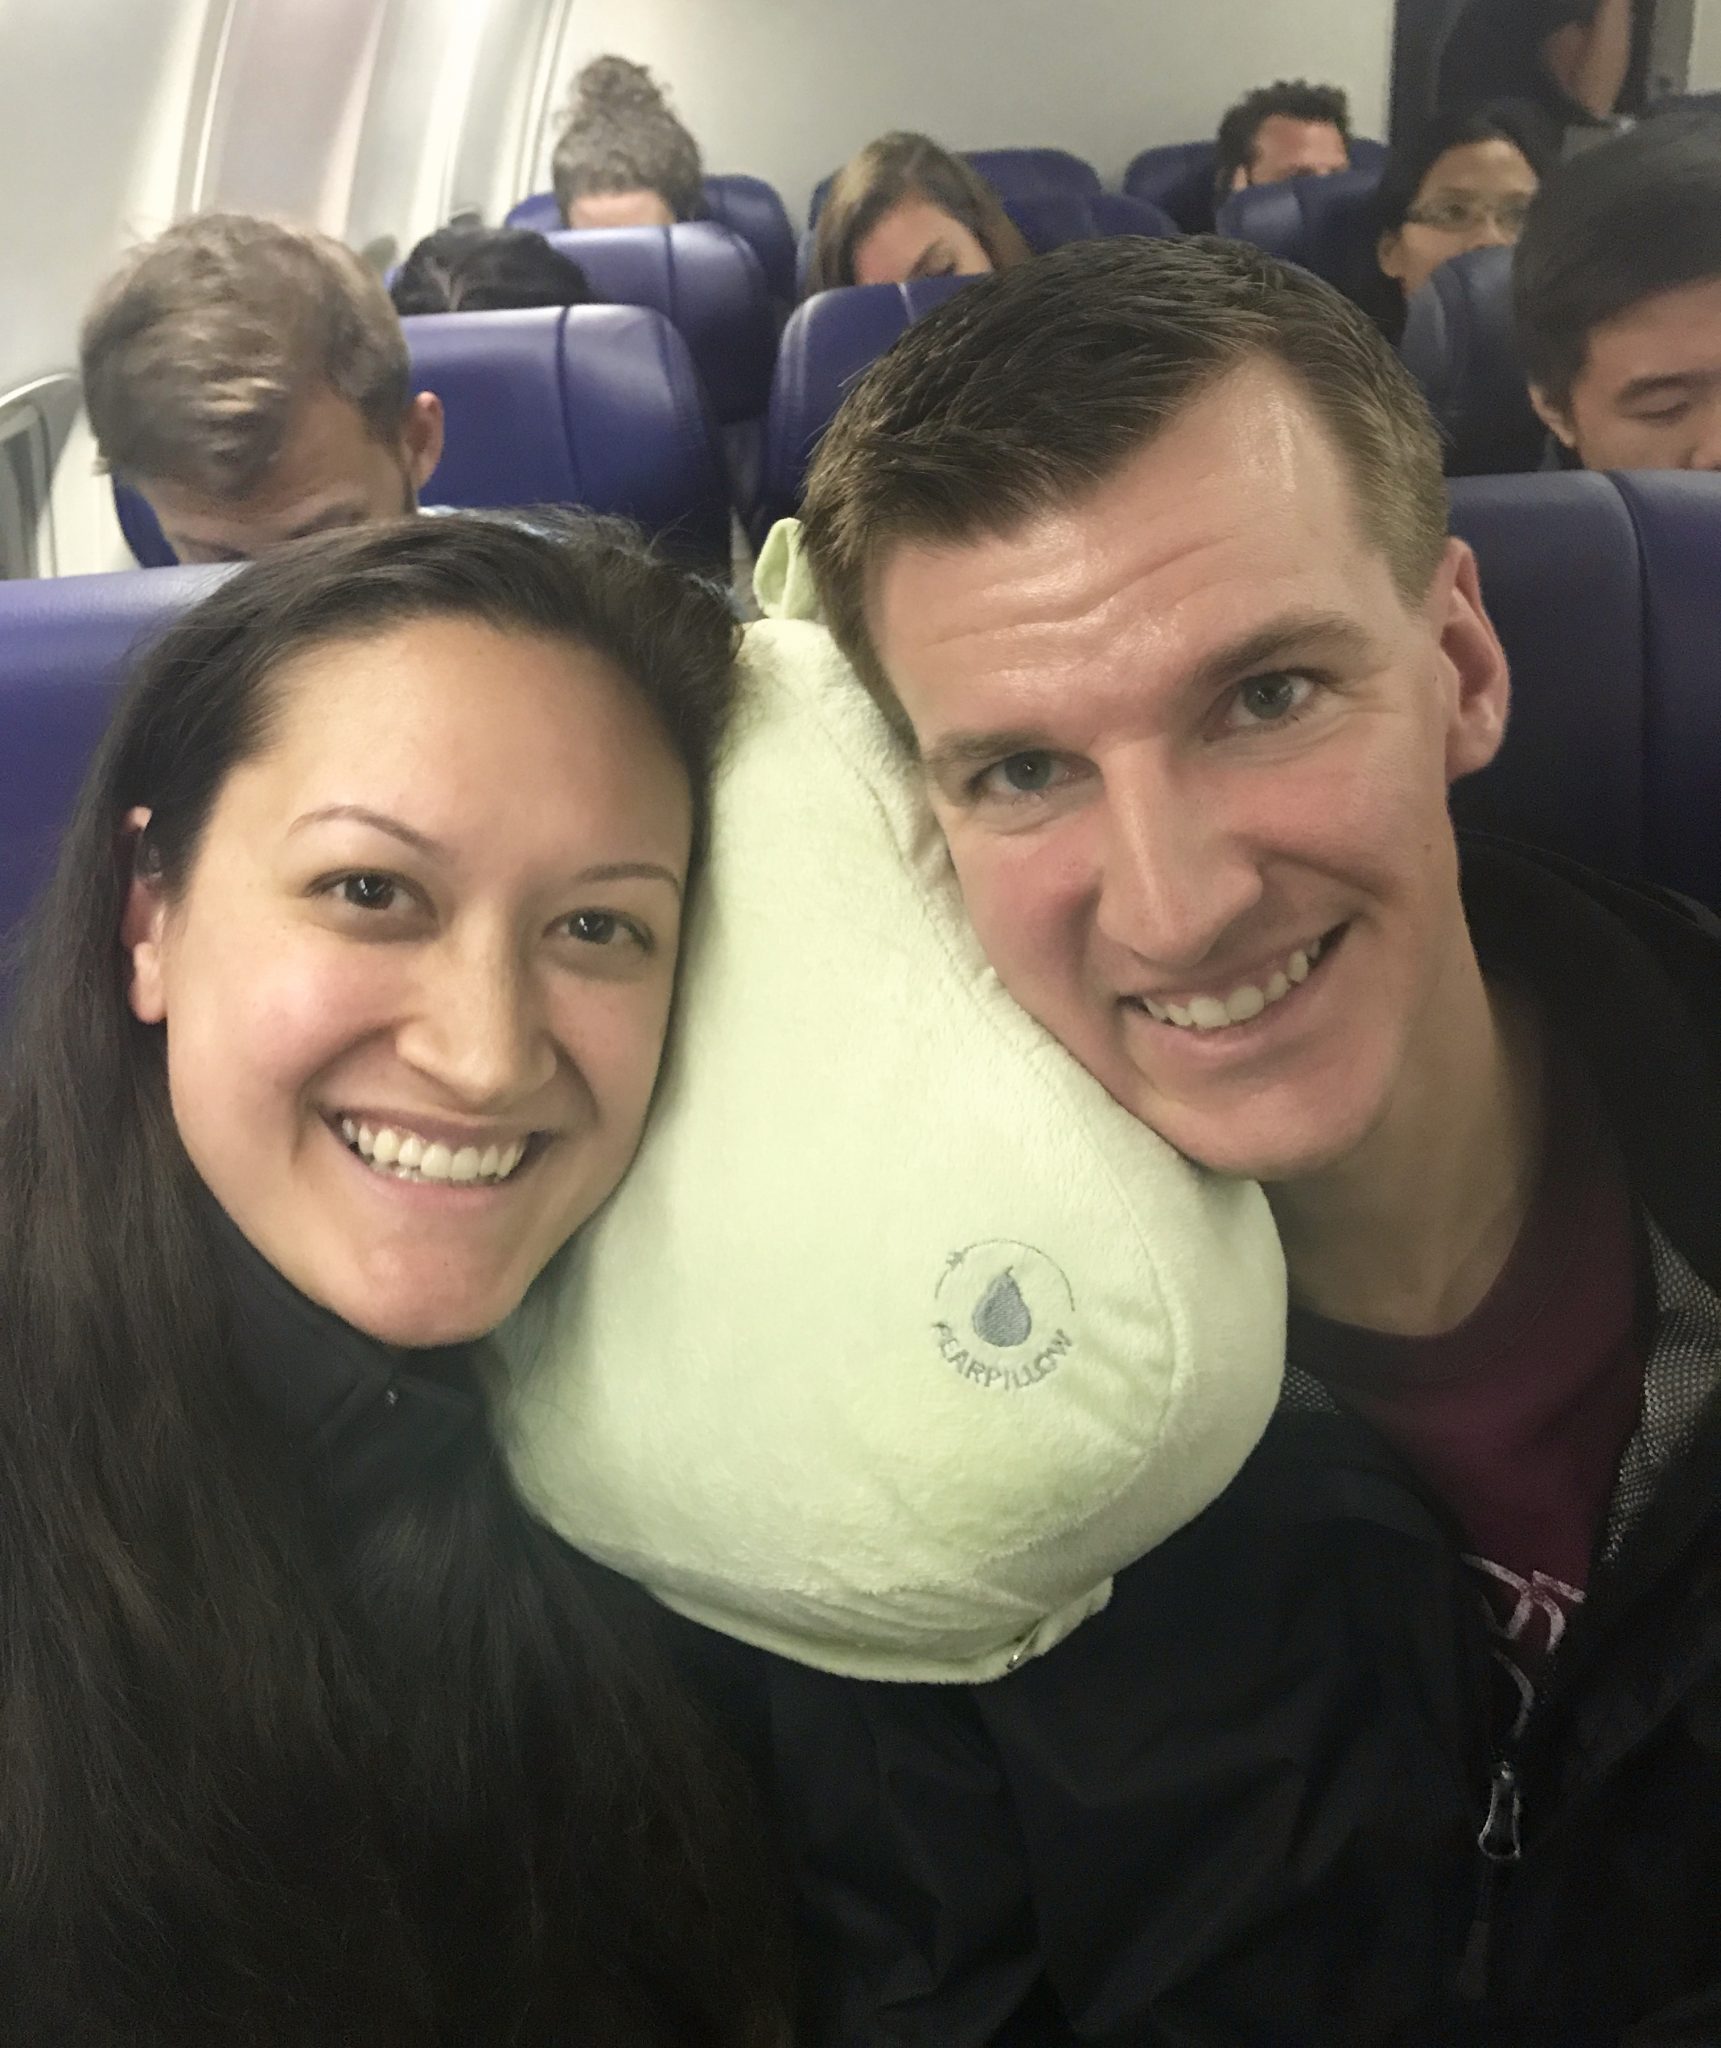 The Best Travel Pillow For Traveling Couples – The PearPillow